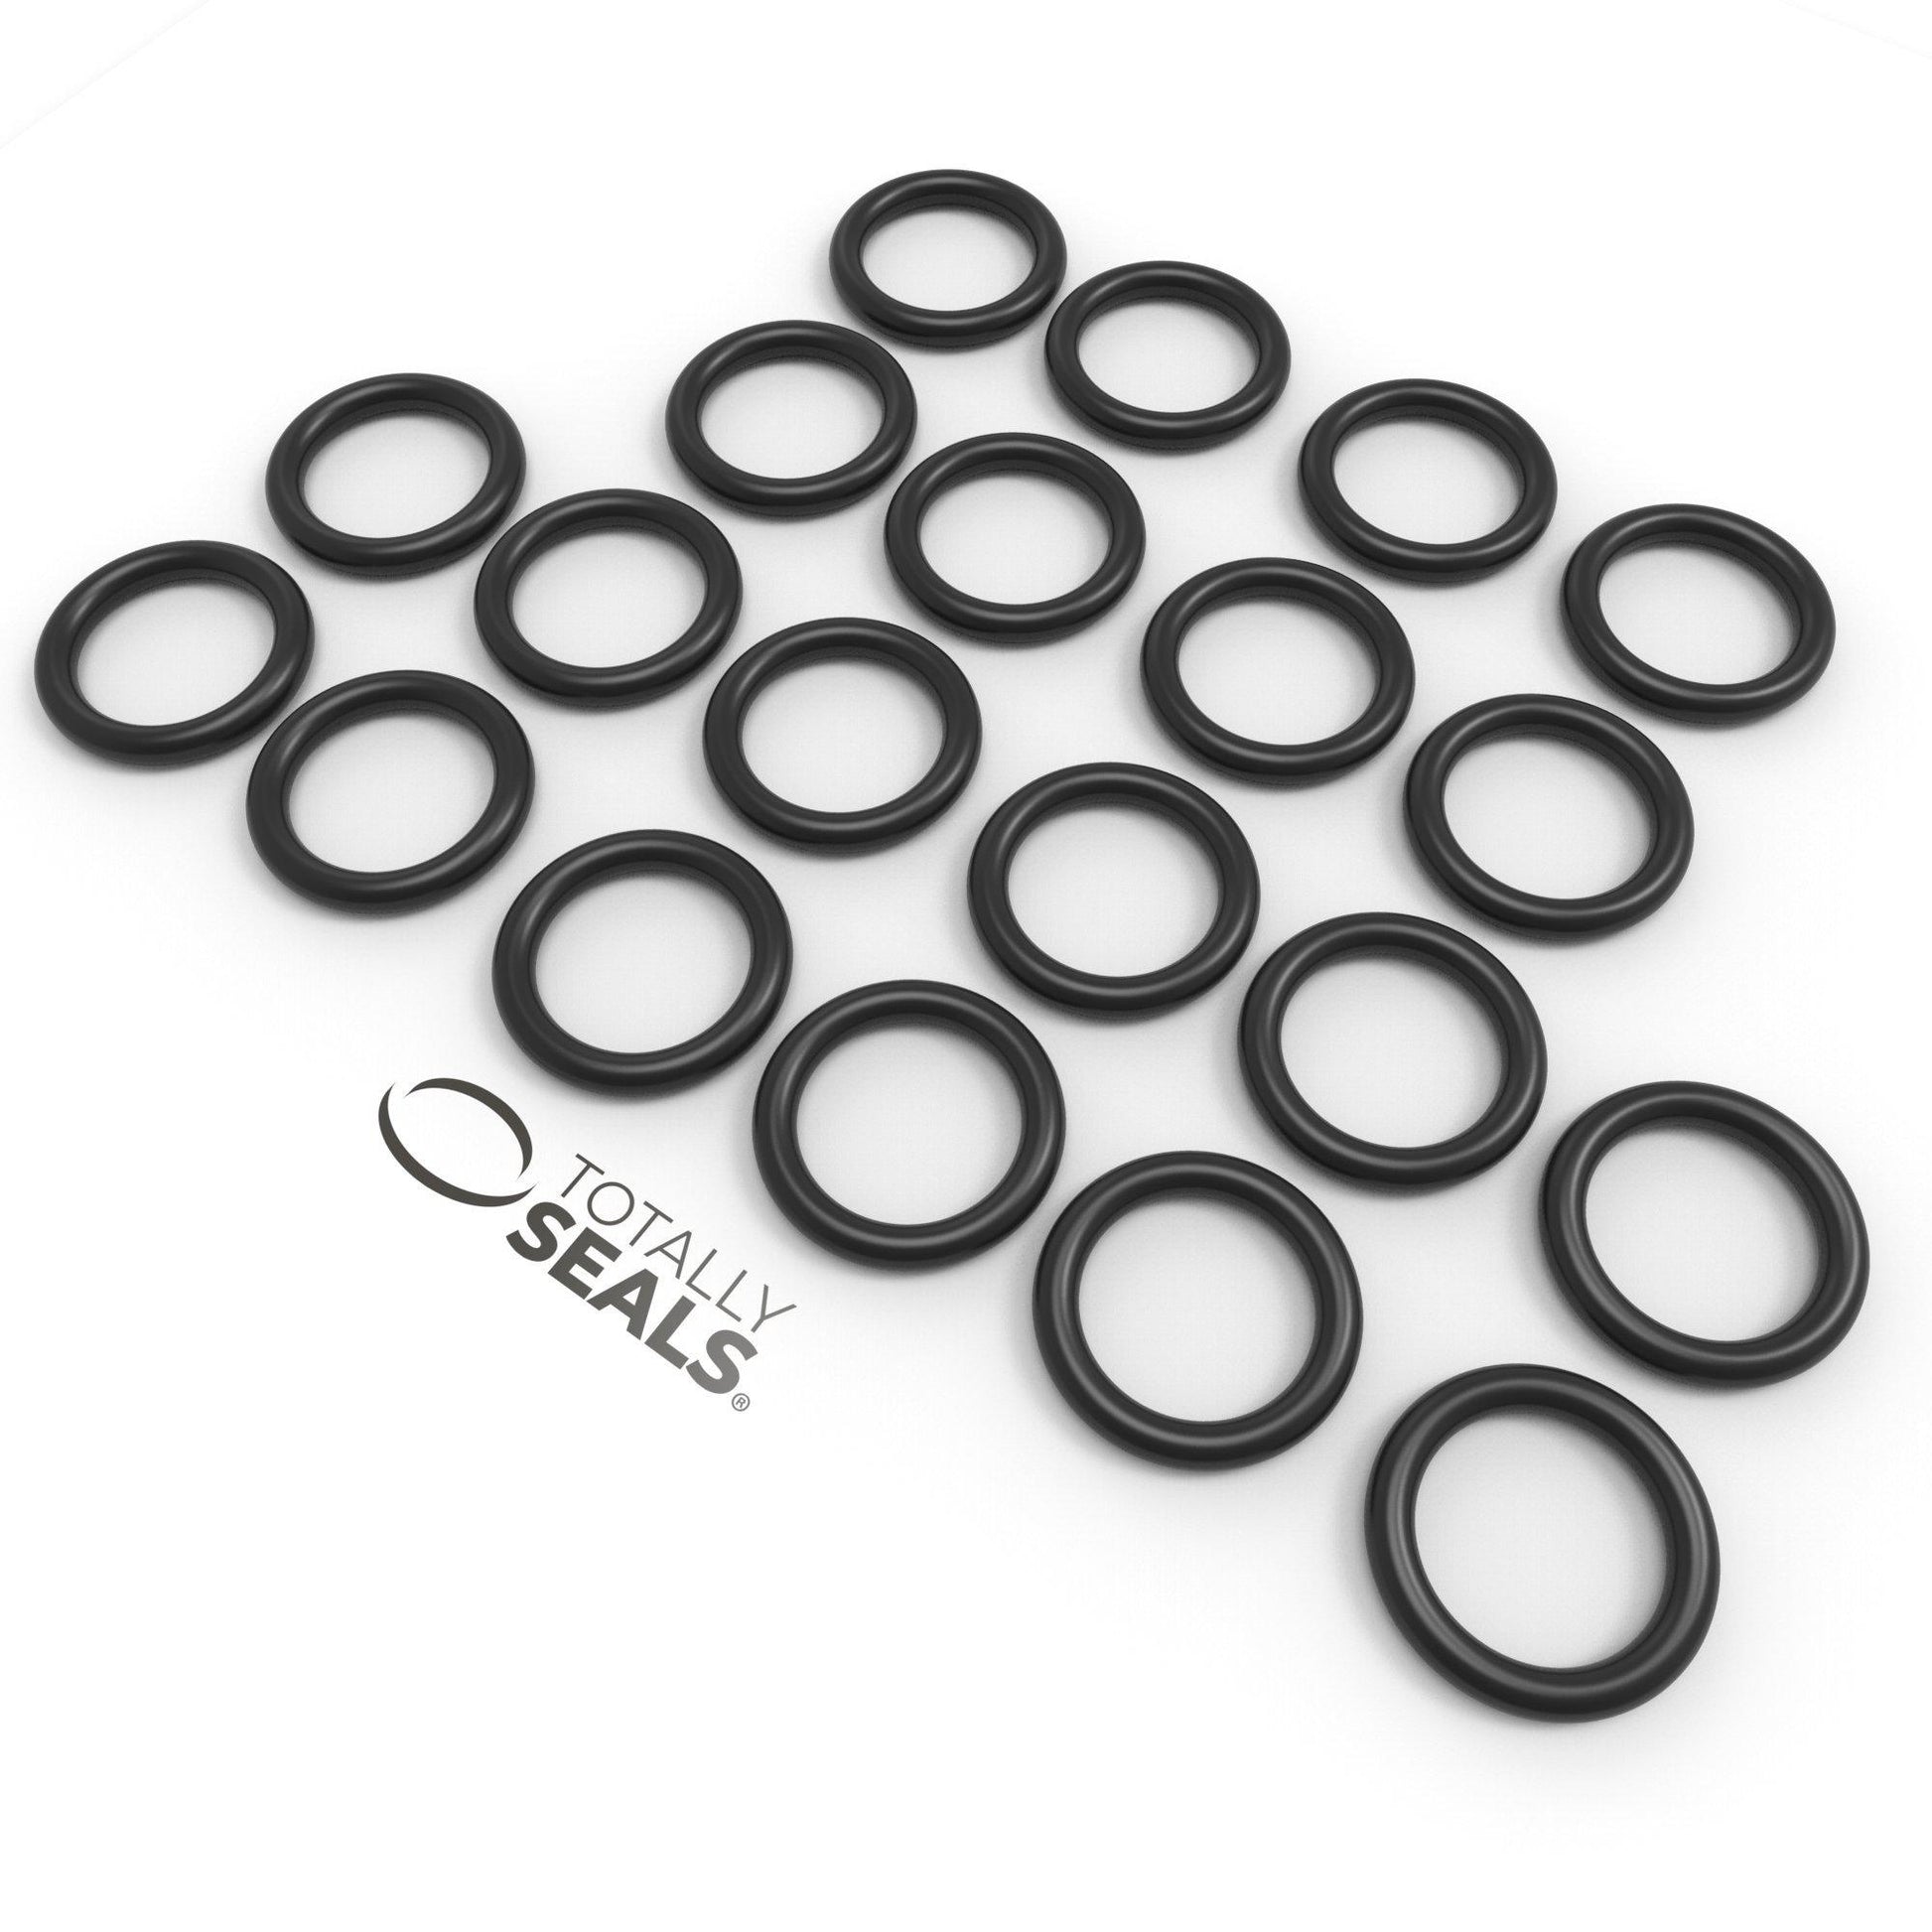 30mm x 1.5mm (33mm OD) Nitrile O-Rings - Totally Seals®